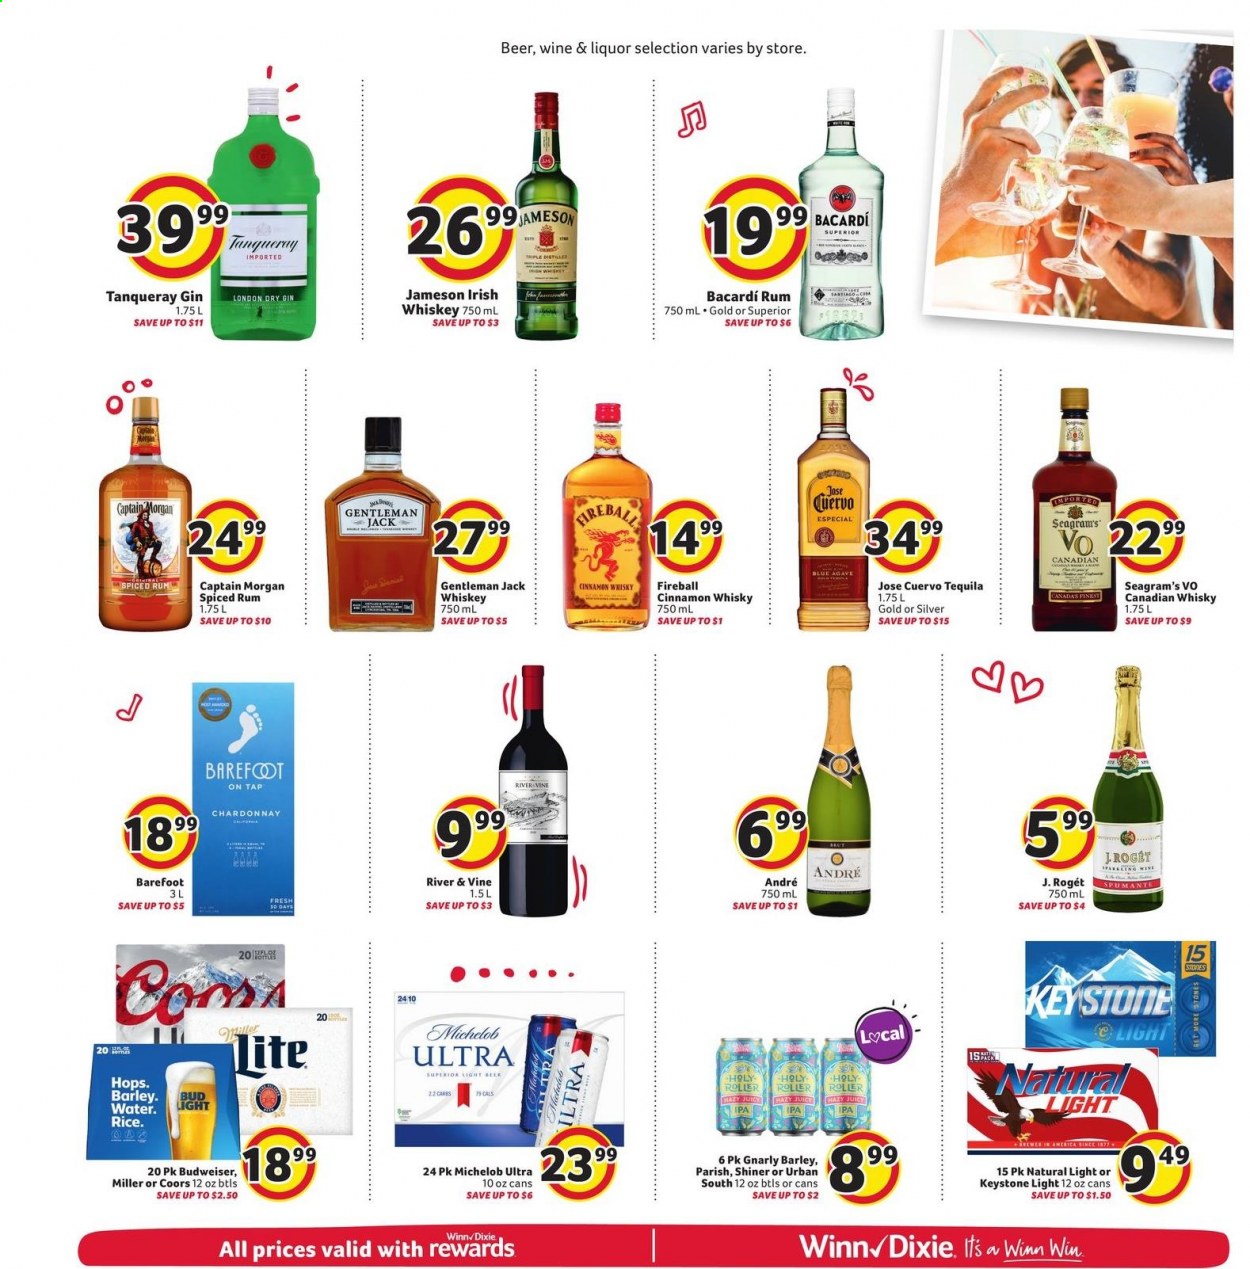 thumbnail - Winn Dixie Flyer - 06/30/2021 - 07/06/2021 - Sales products - spumante, white wine, Chardonnay, wine, Bacardi, canadian whisky, Captain Morgan, gin, rum, spiced rum, tequila, whiskey, Jameson, liquor, cinnamon whisky, whisky, beer, Budweiser, Coors, Michelob, Bud Light, Miller, IPA, Keystone. Page 12.